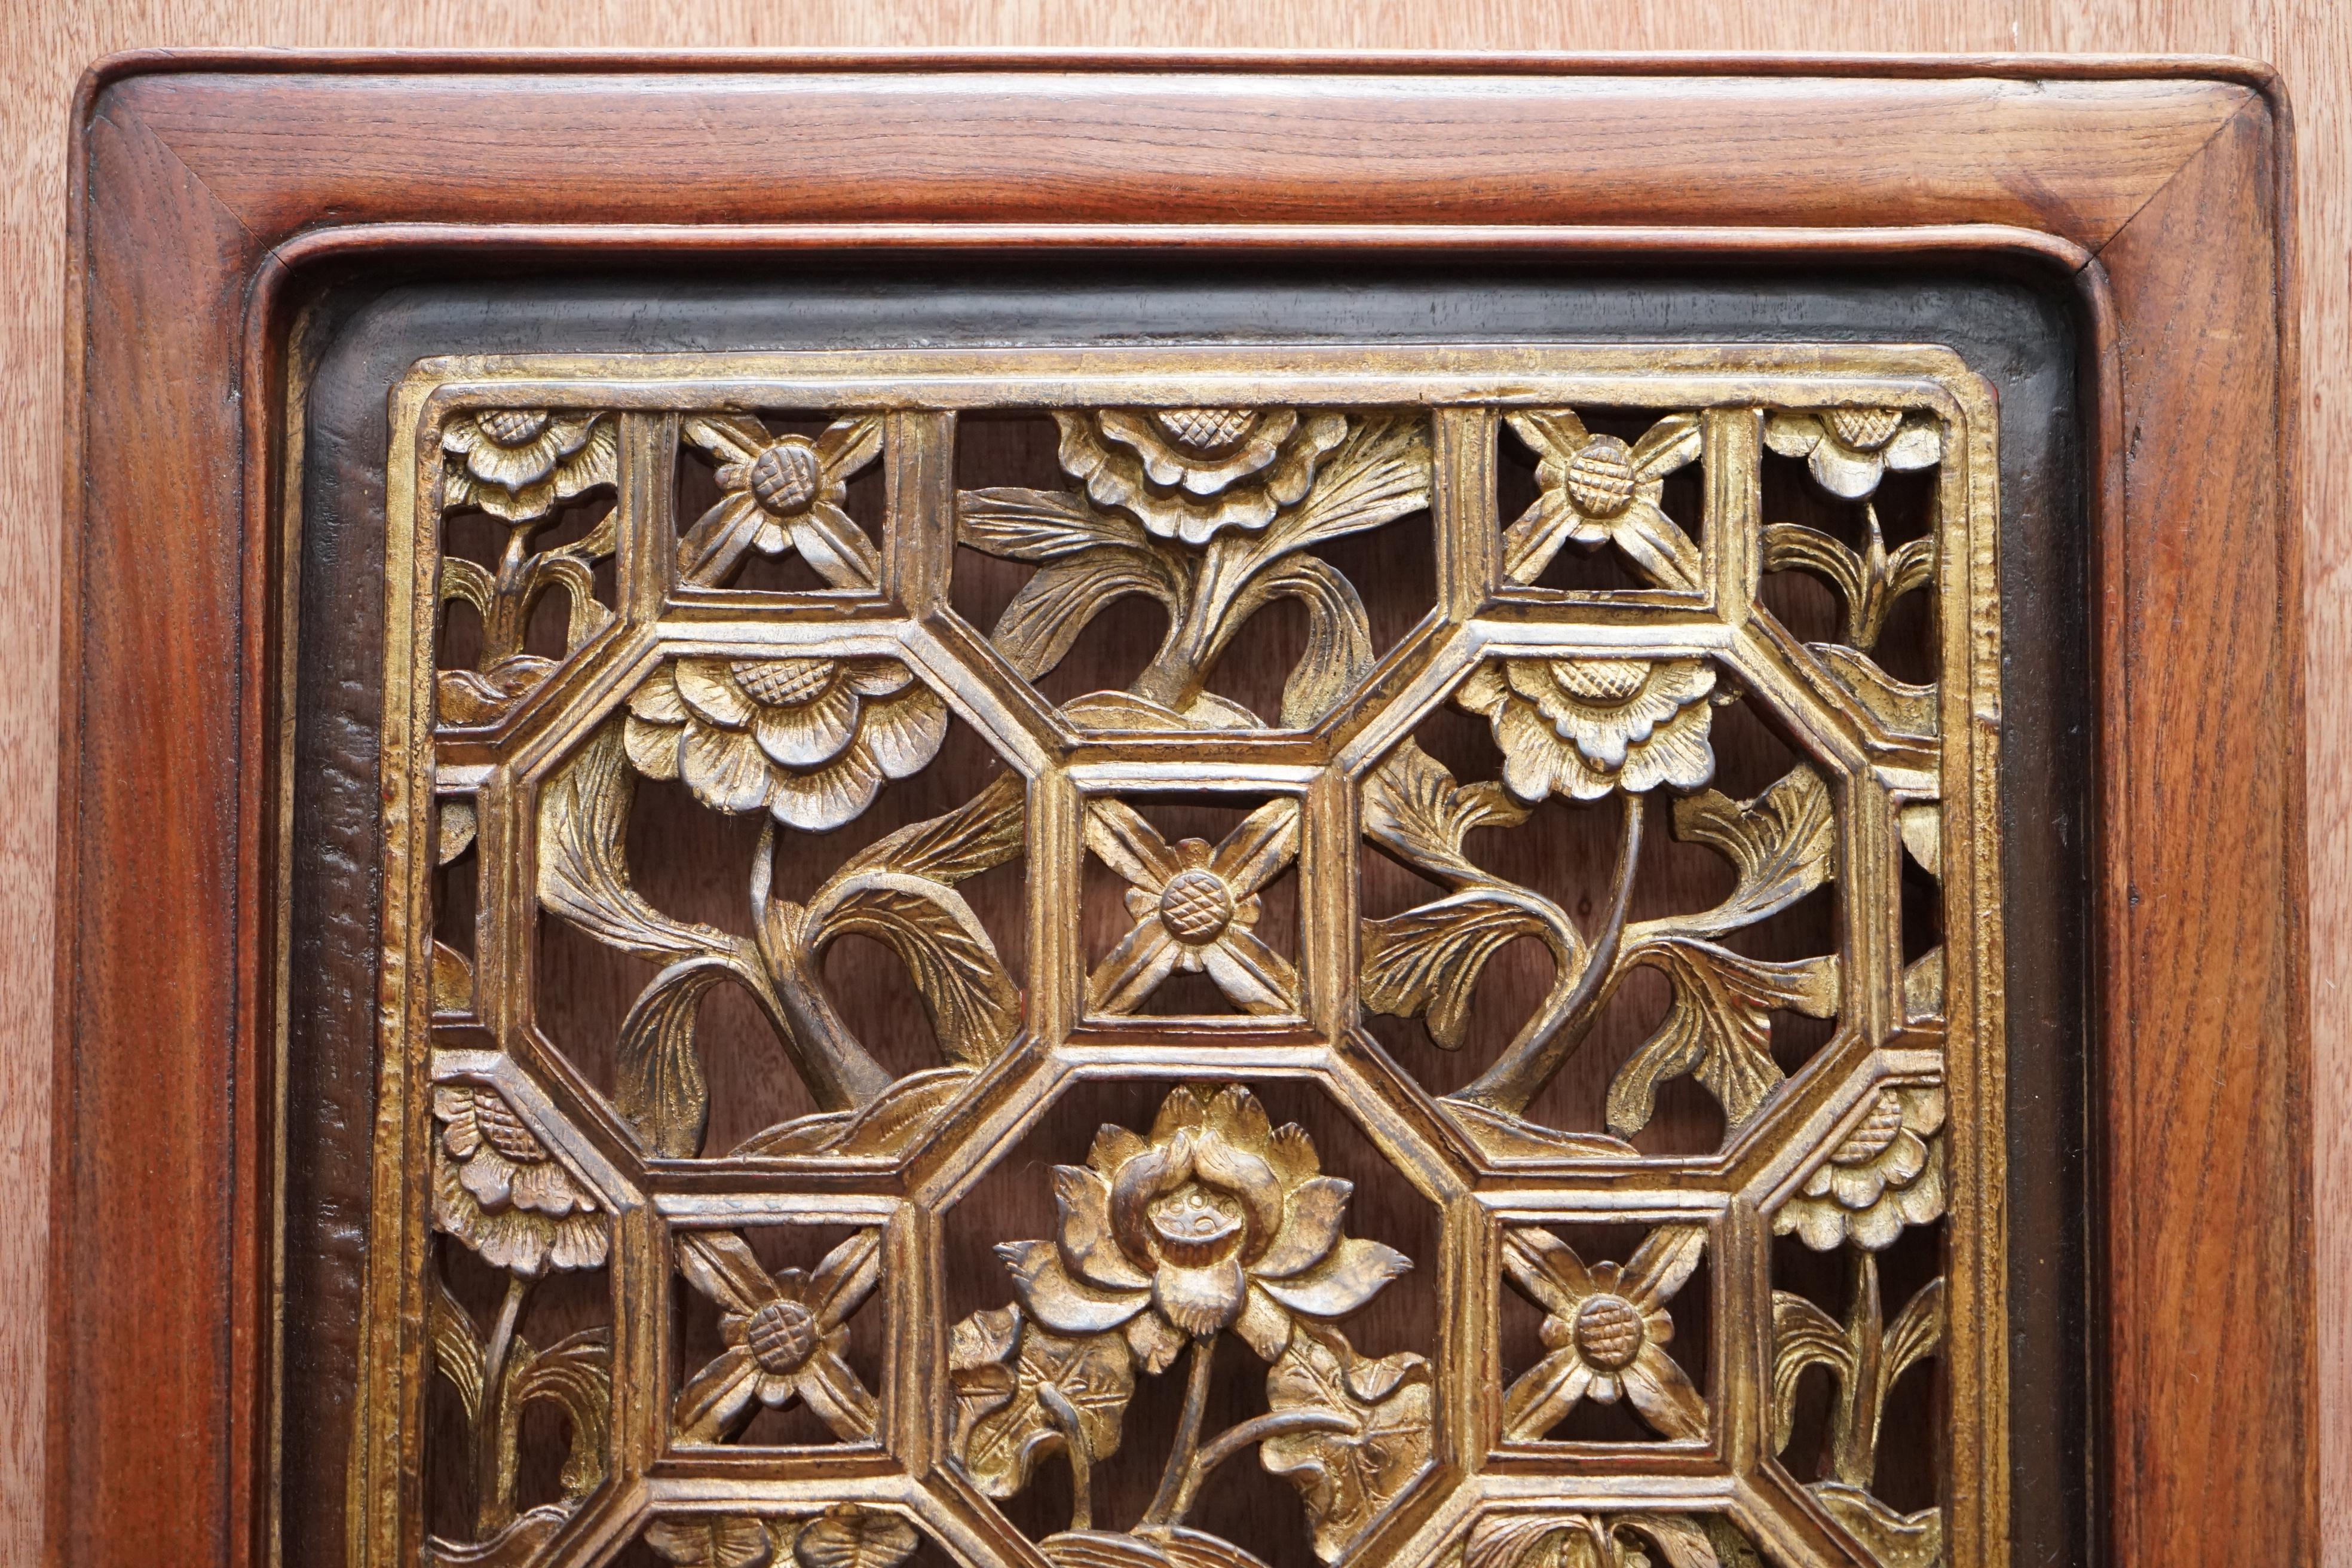 Chinese Export circa 1900 Gold Leaf Painted Fret Work Carved Wall Panel in Teak For Sale 2